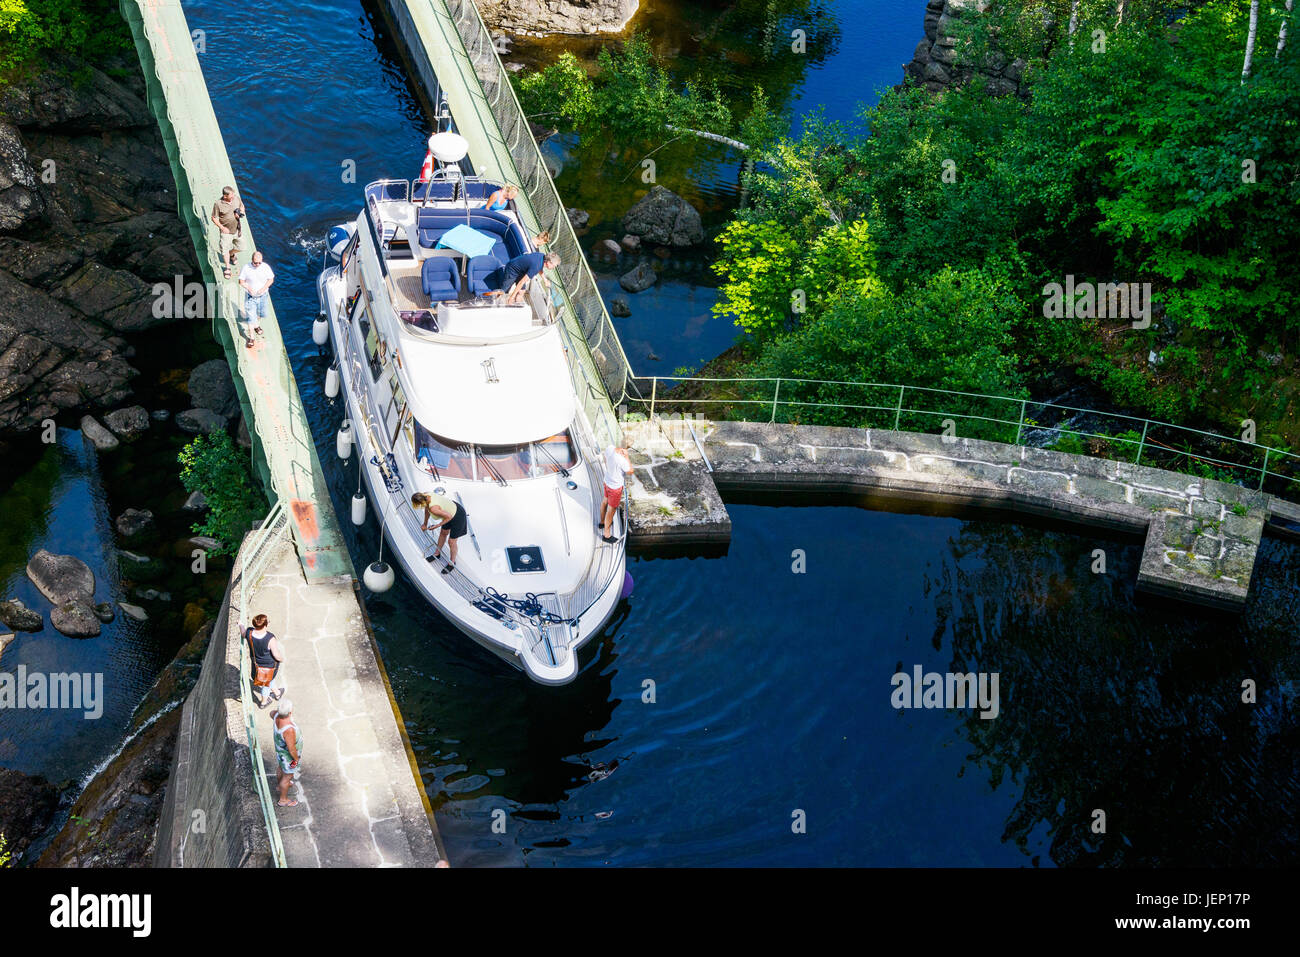 Boat on canal, high angle view Stock Photo